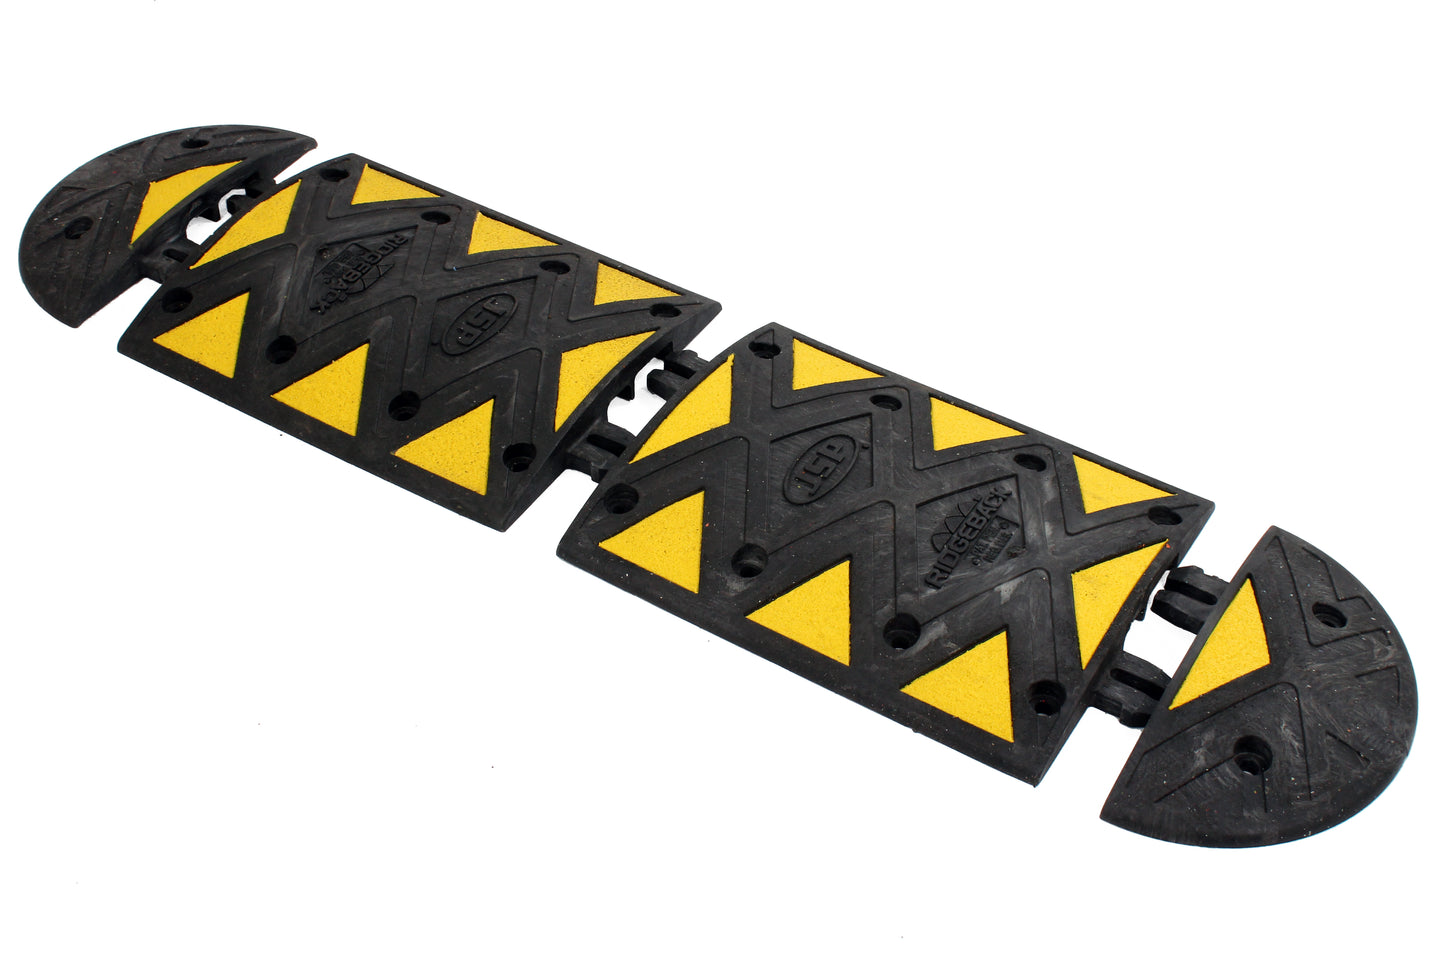 Ridgeback Speed Bump Kit, 50mm or 75mm - Complete Kit with Free Delivery